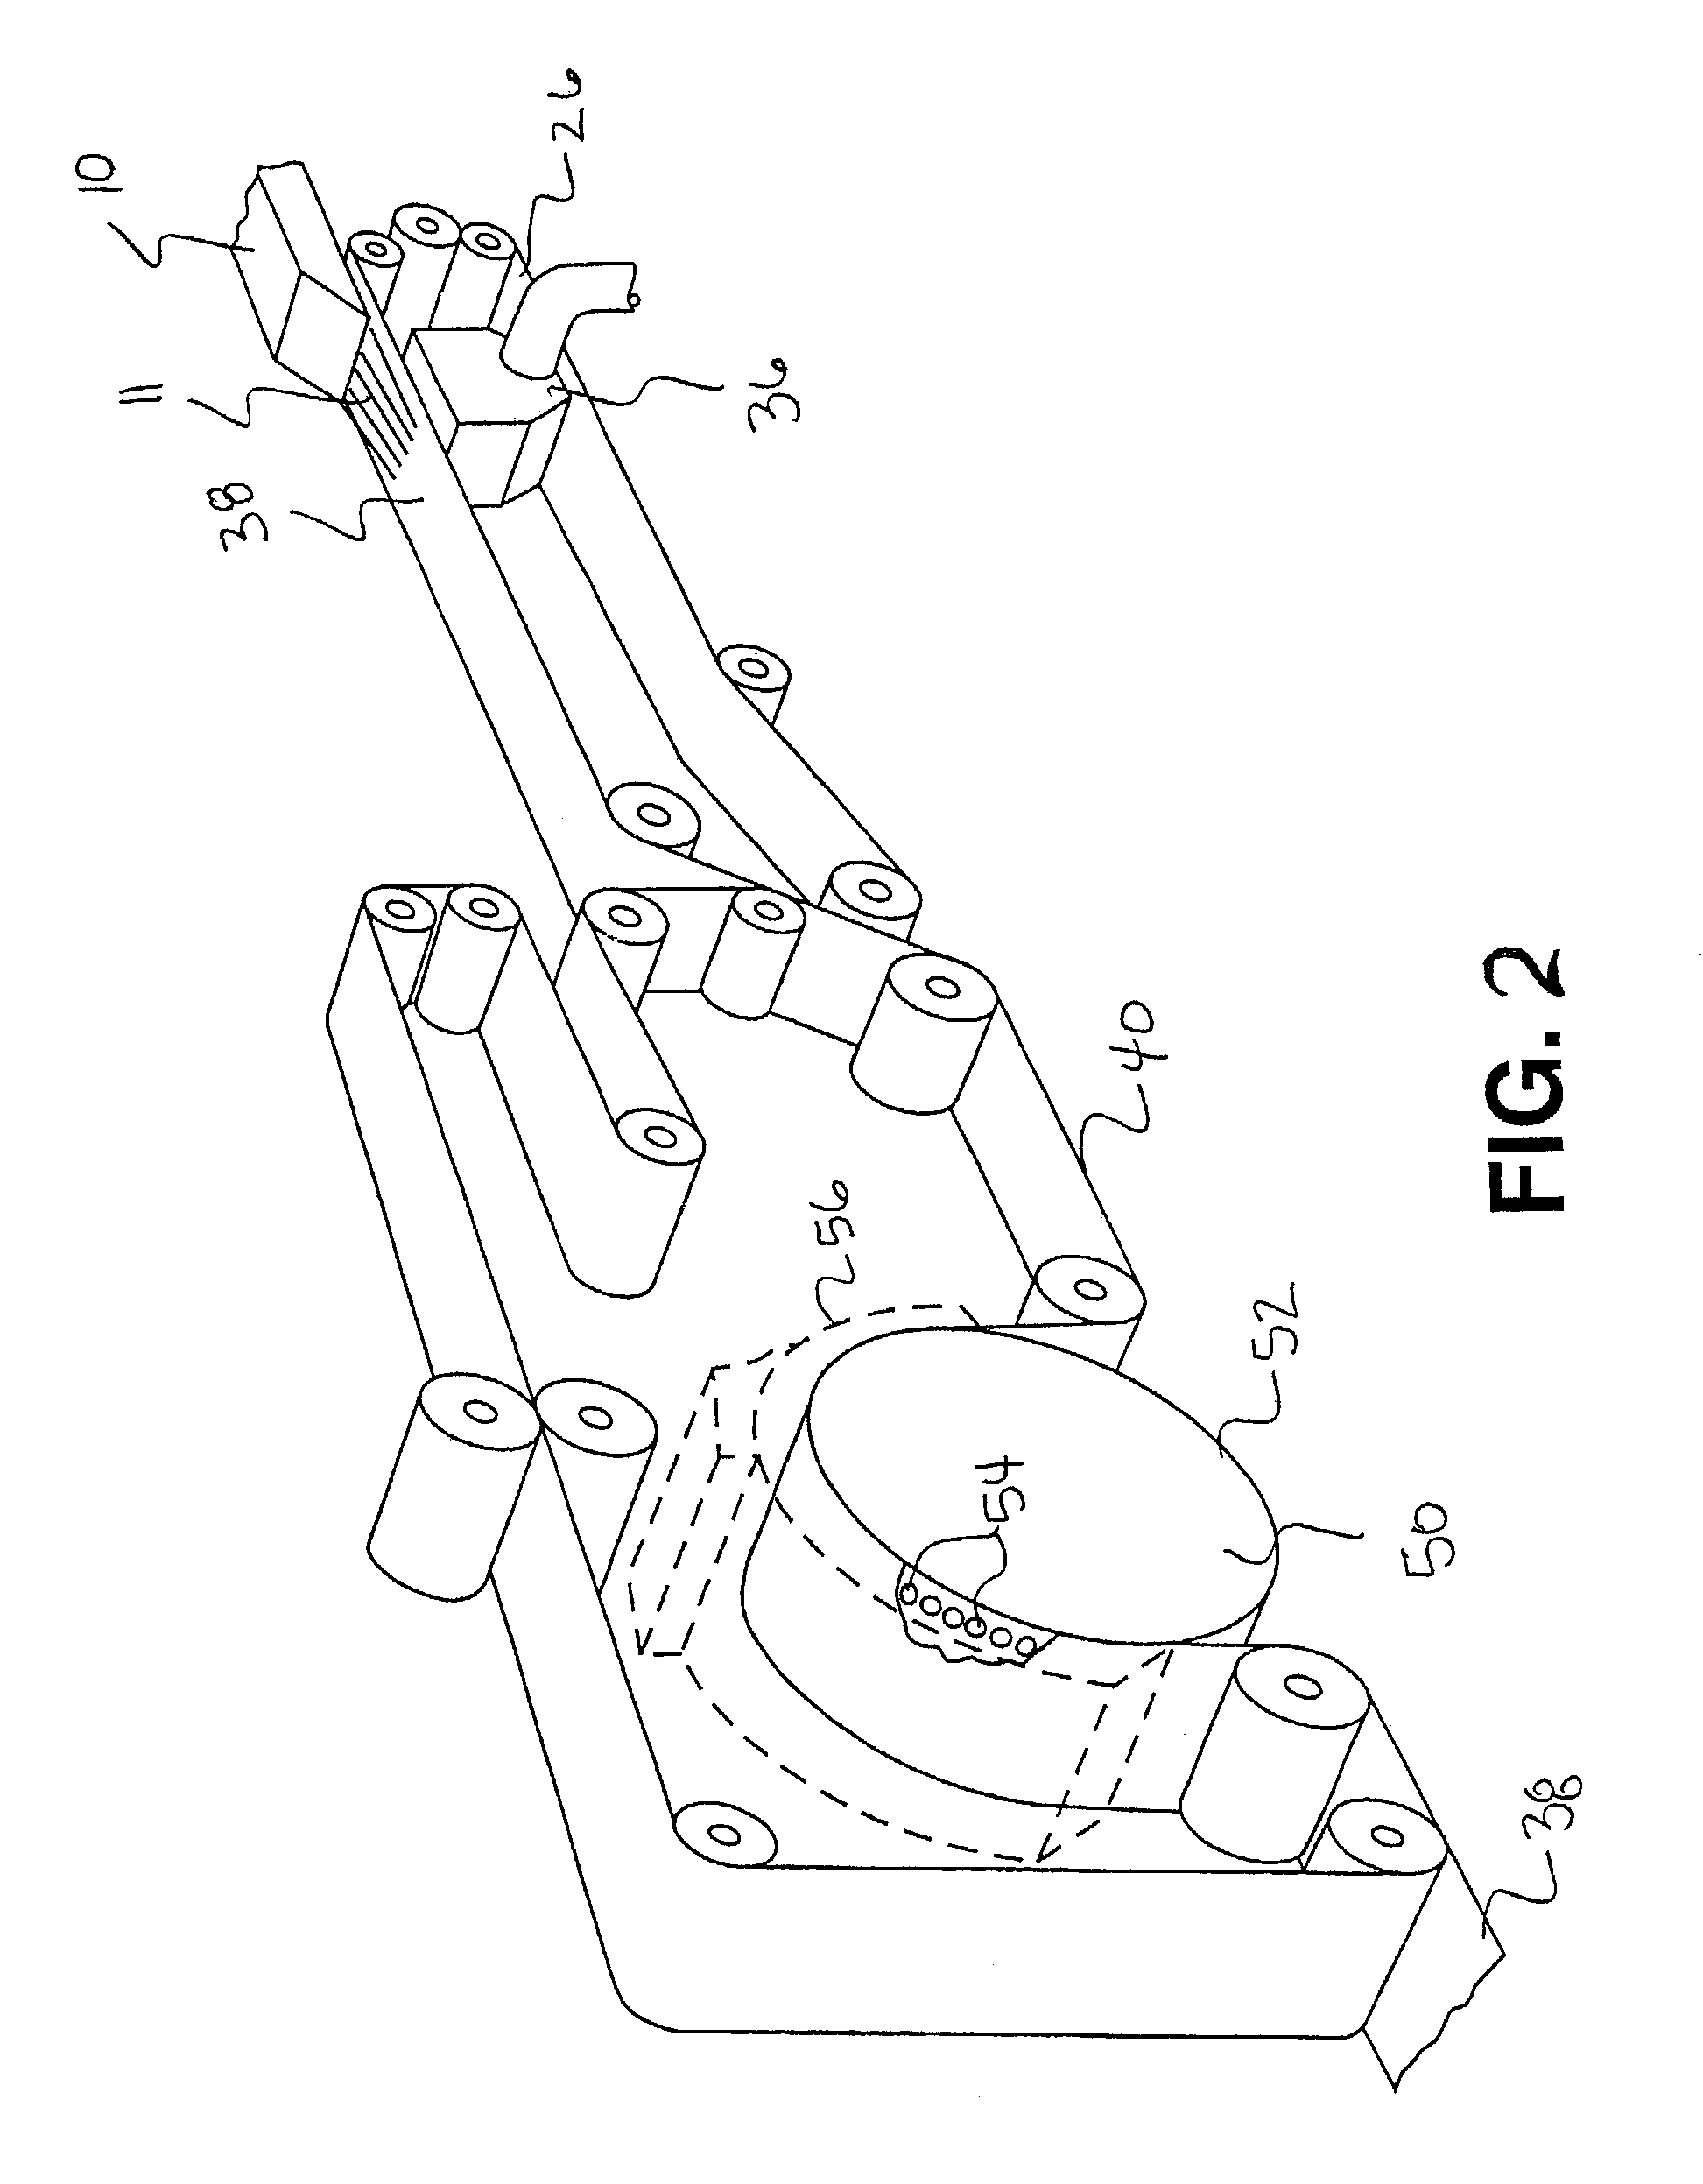 Wiping products having a low coefficient of friction in the wet state and process for producing same